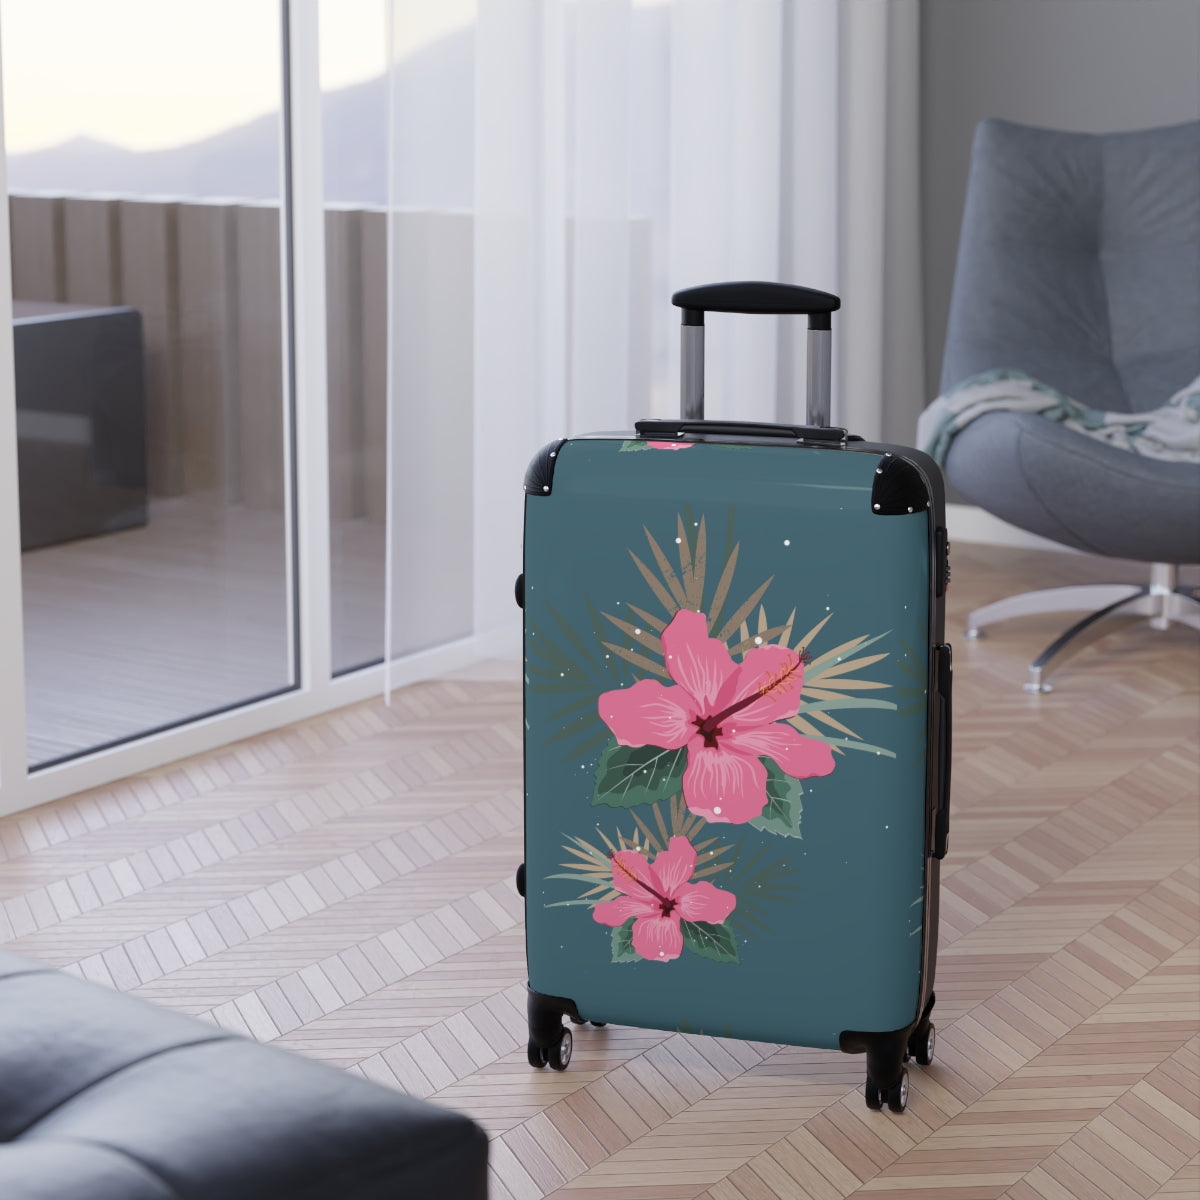 PINK FLORAL SUITCASE Set Artzira, Cabin Suitcase Carry-on Luggage, Trolly Travel Bags Double Wheeled Spinners, Women's Choice